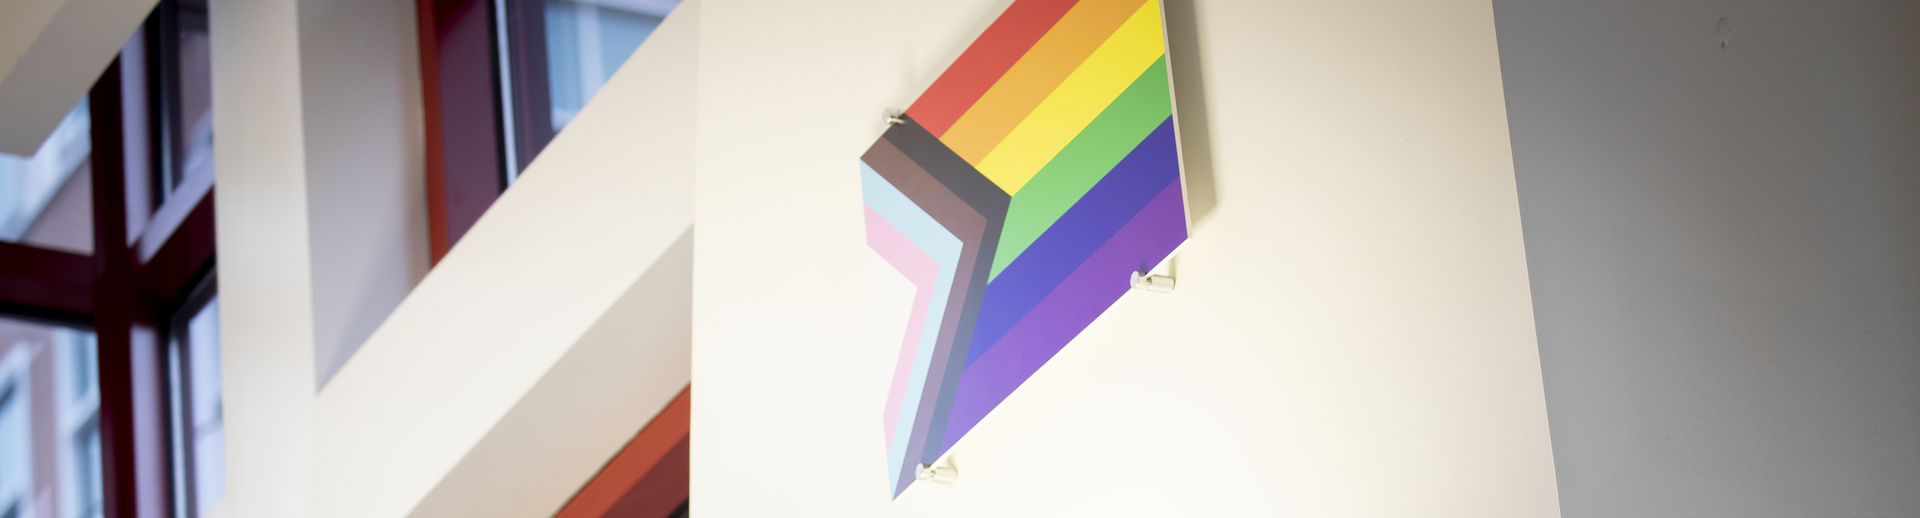 The pride flag hangs in the student center of Temple University.